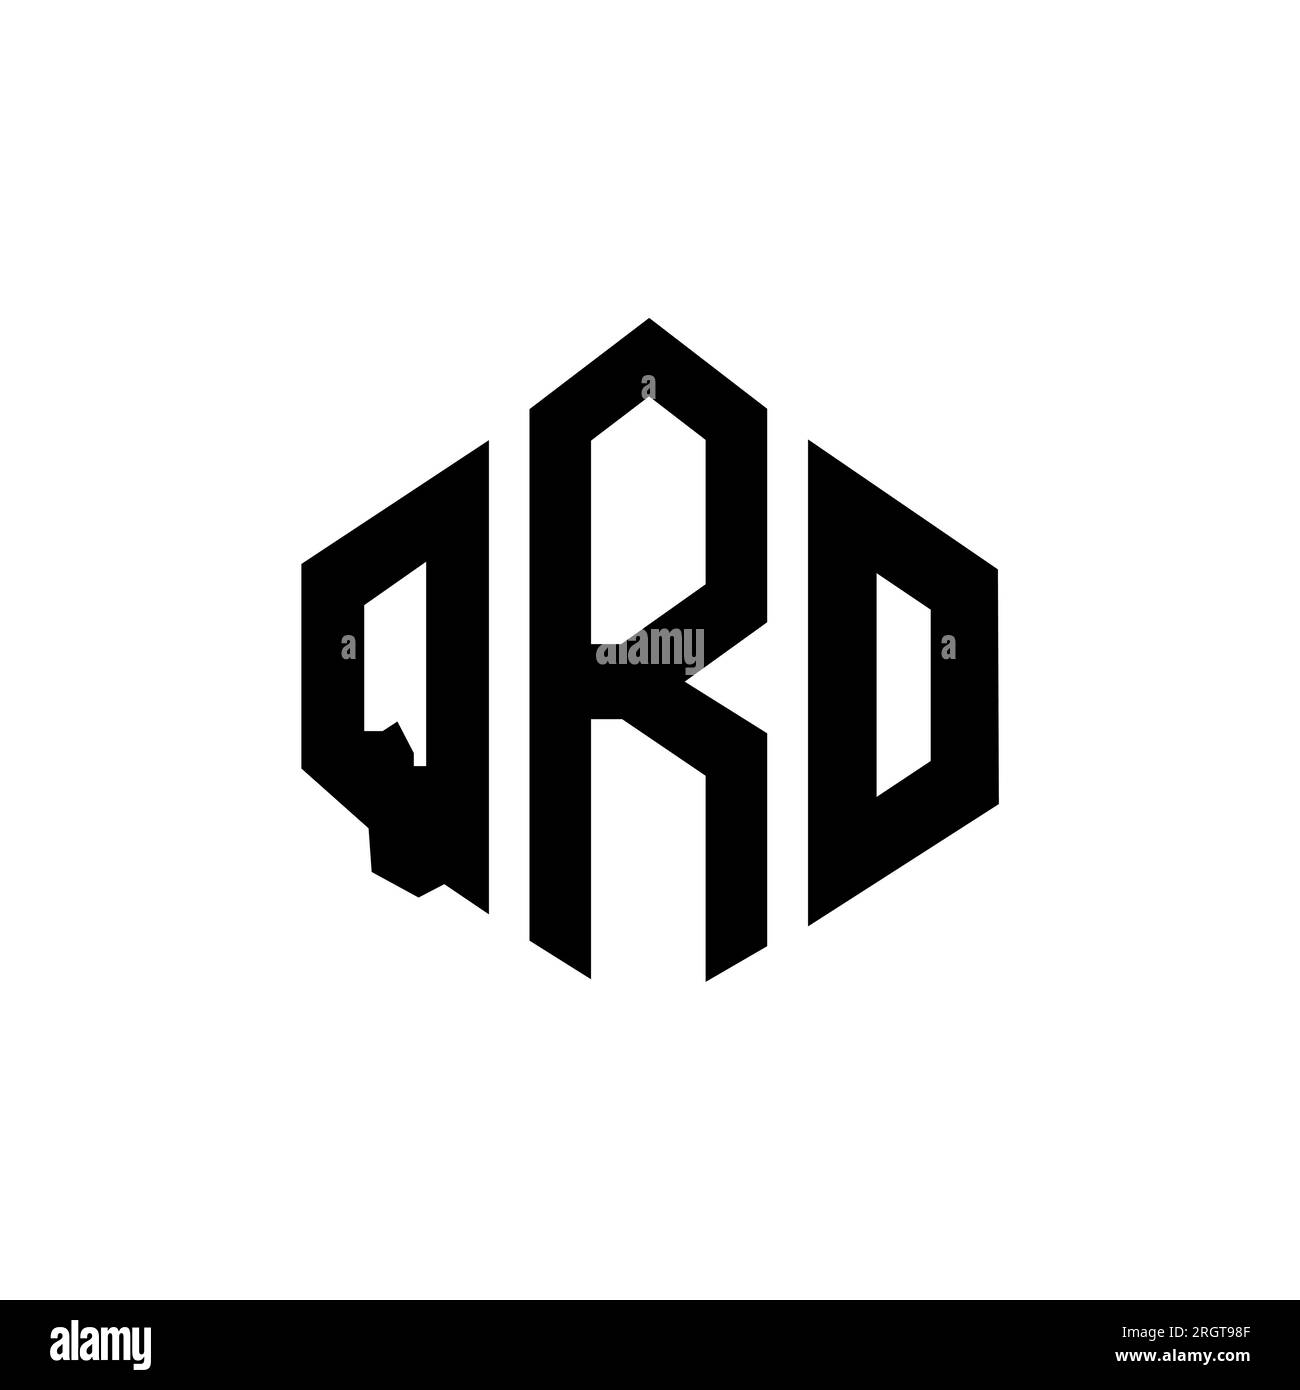 QRO letter logo design with polygon shape. QRO polygon and cube shape logo design. QRO hexagon vector logo template white and black colors. QRO monogr Stock Vector